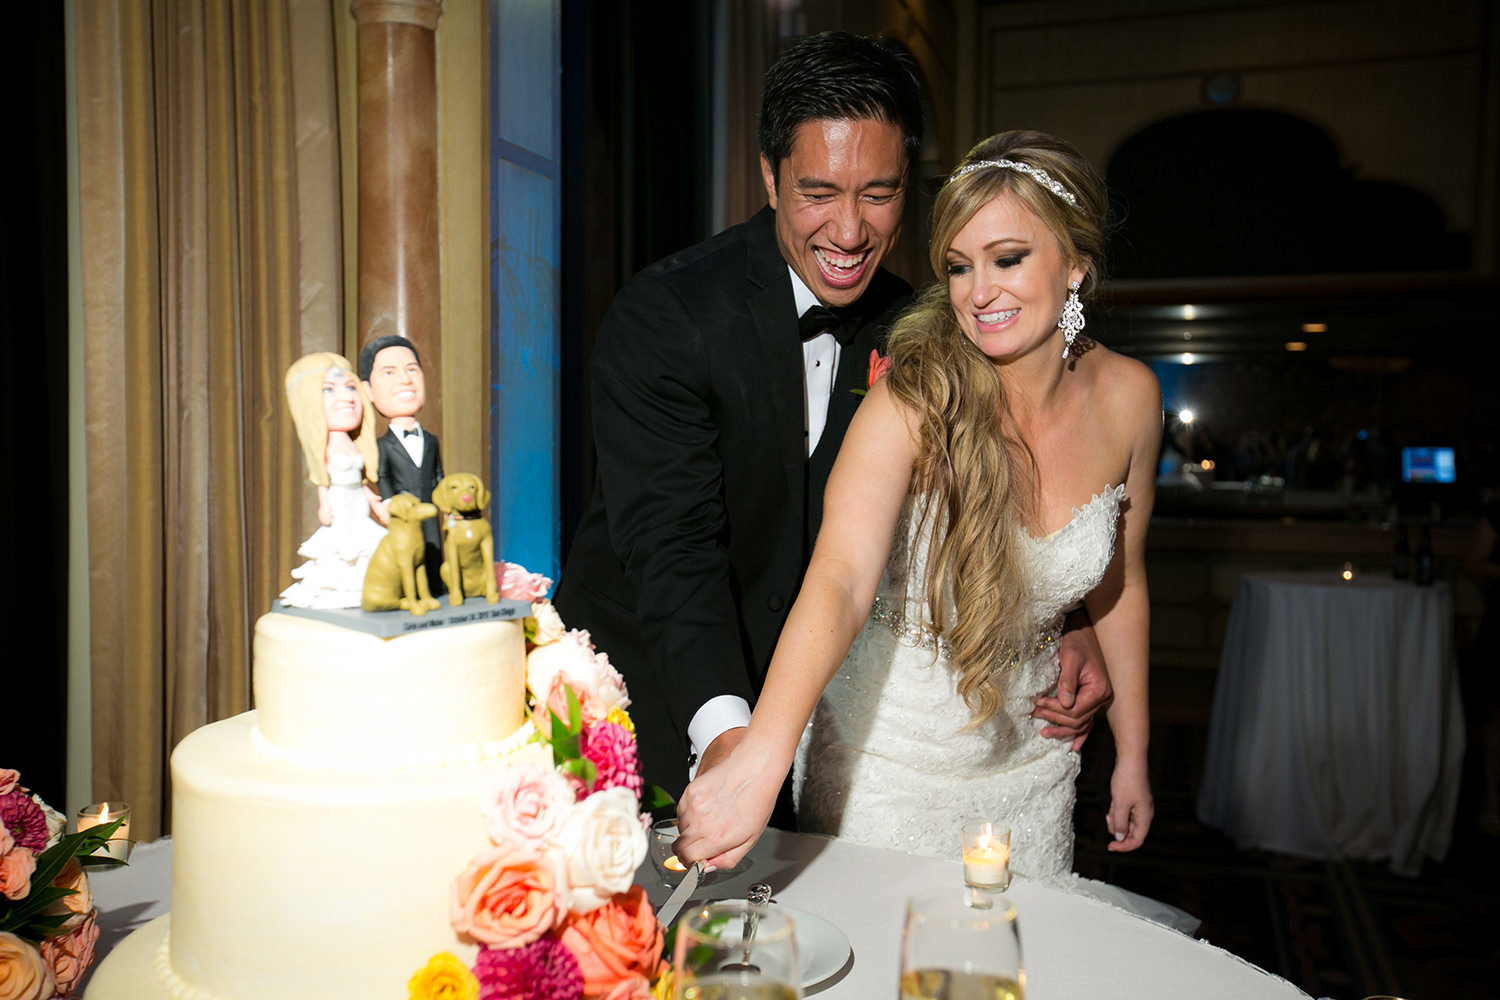 bride and groom cake cutting laughing